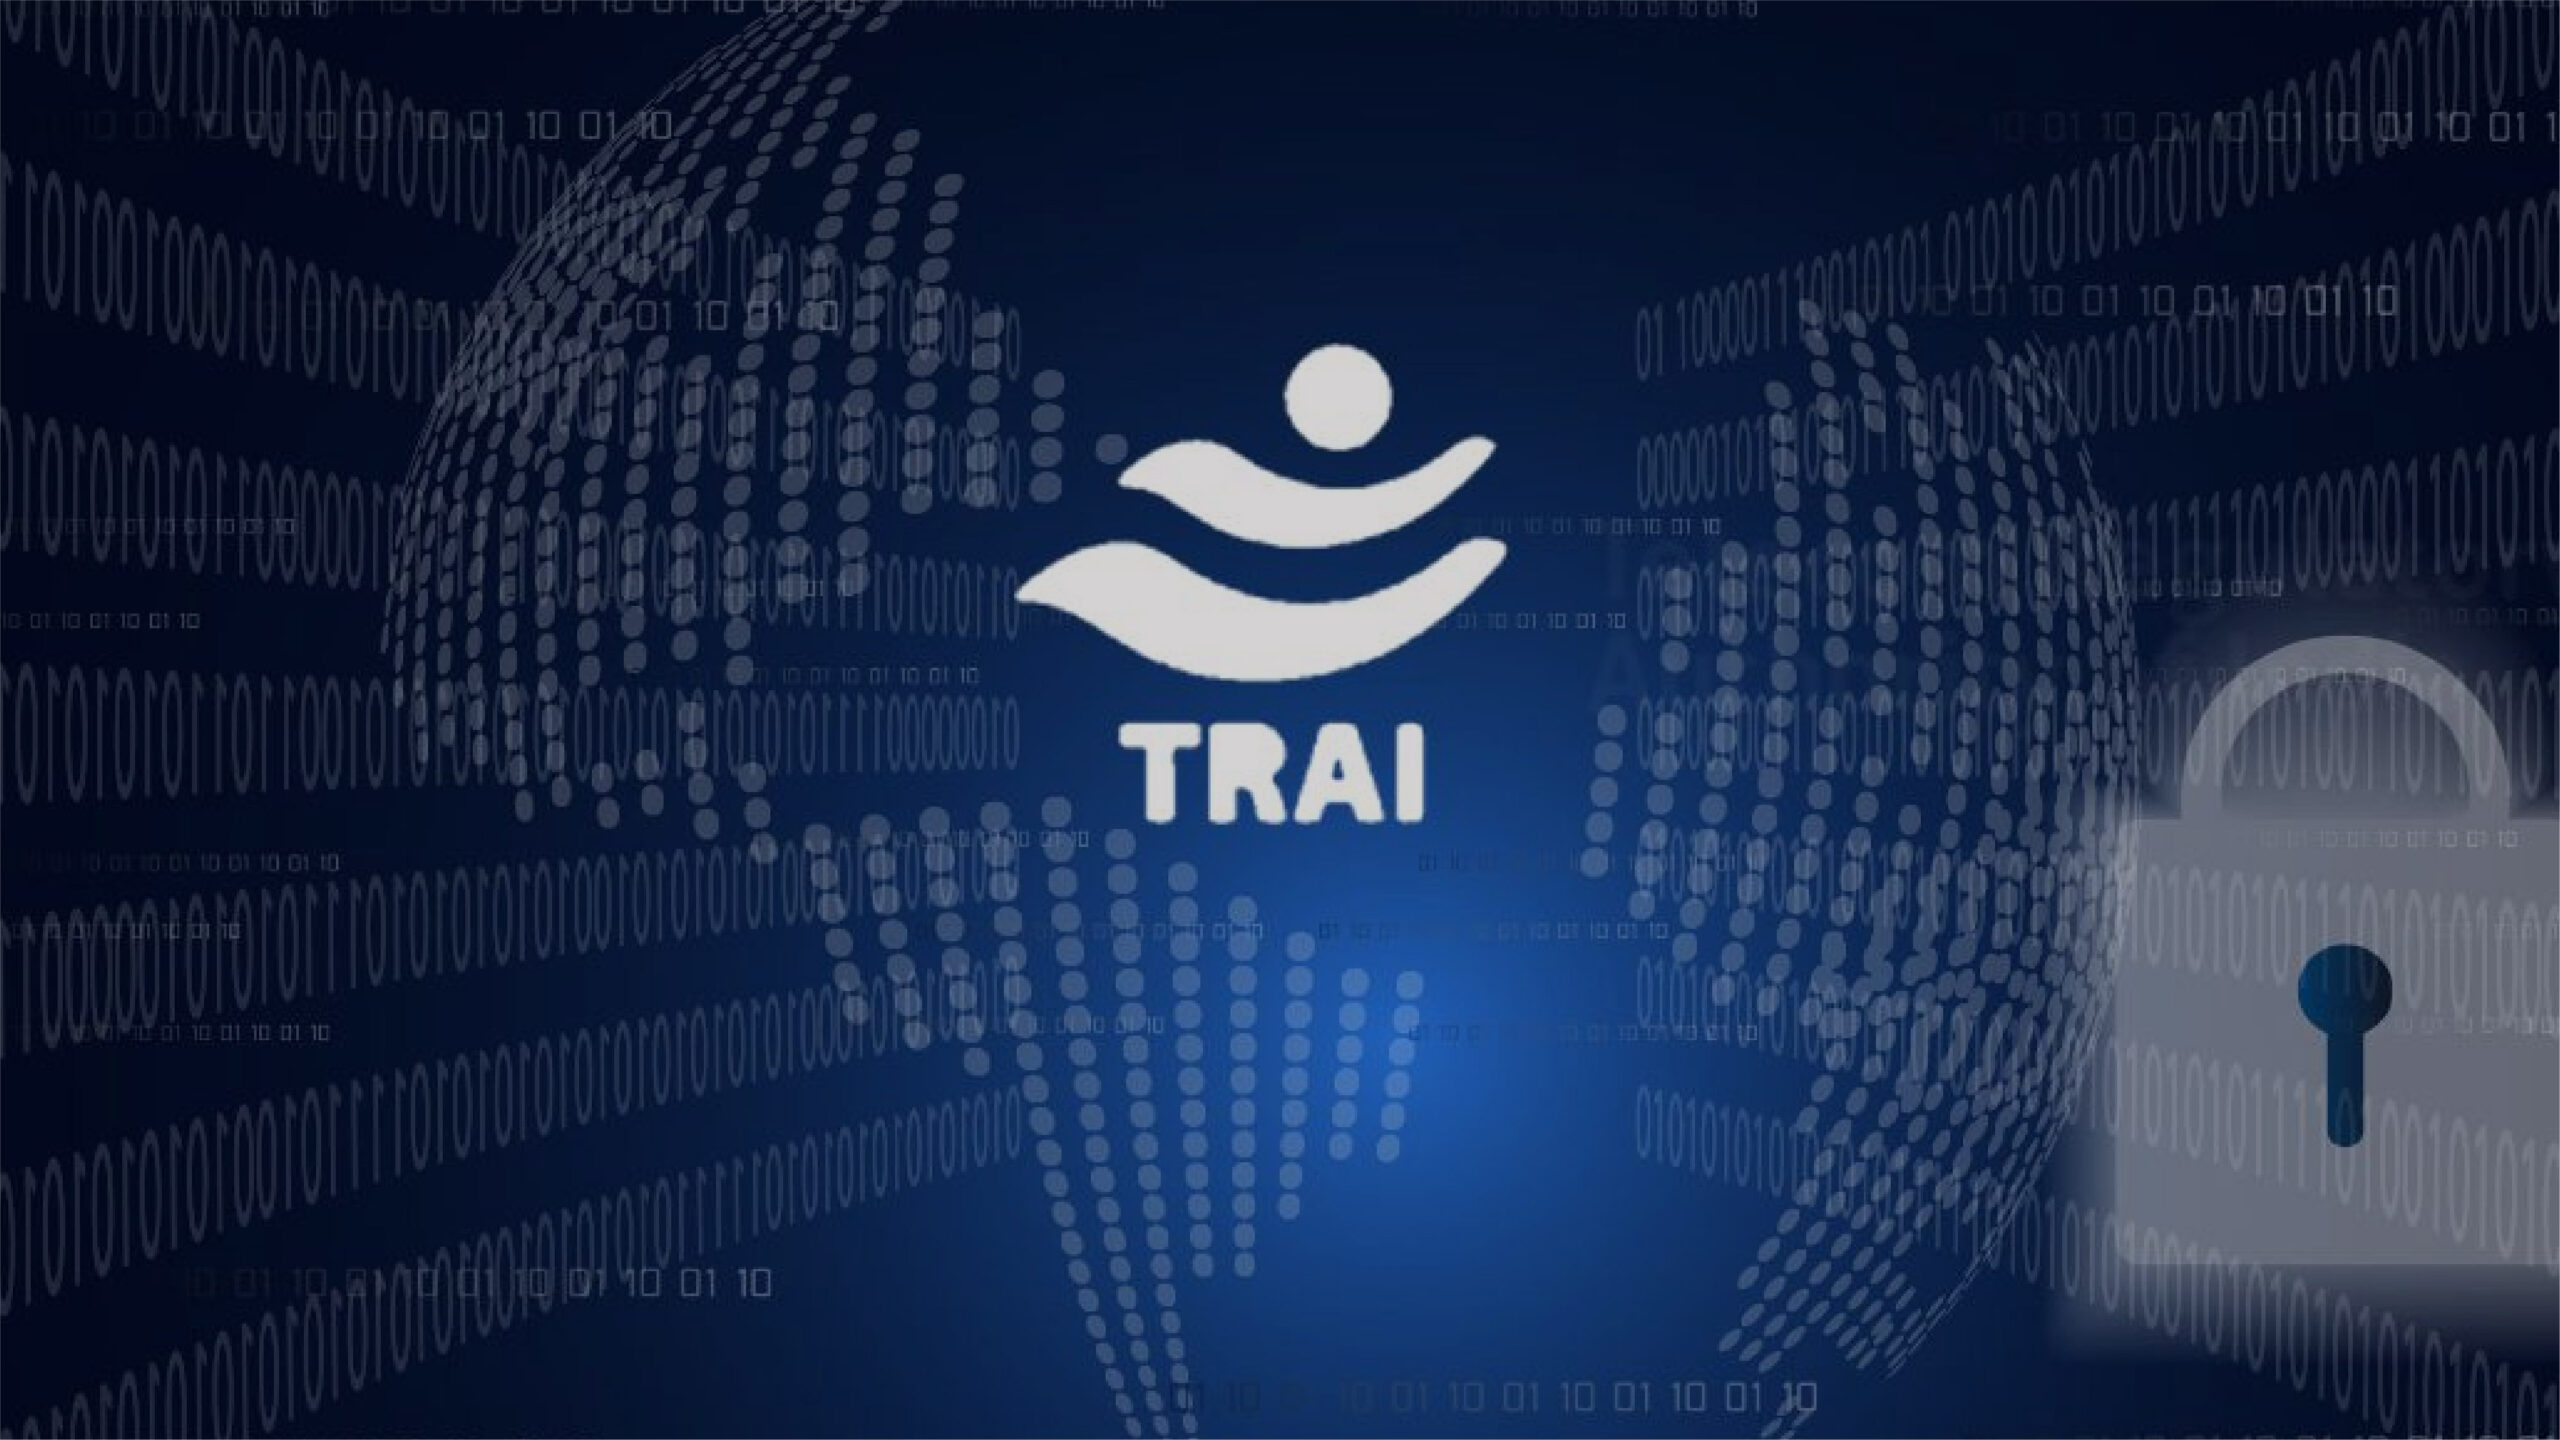 TRAI Paths a new future of cyberspace